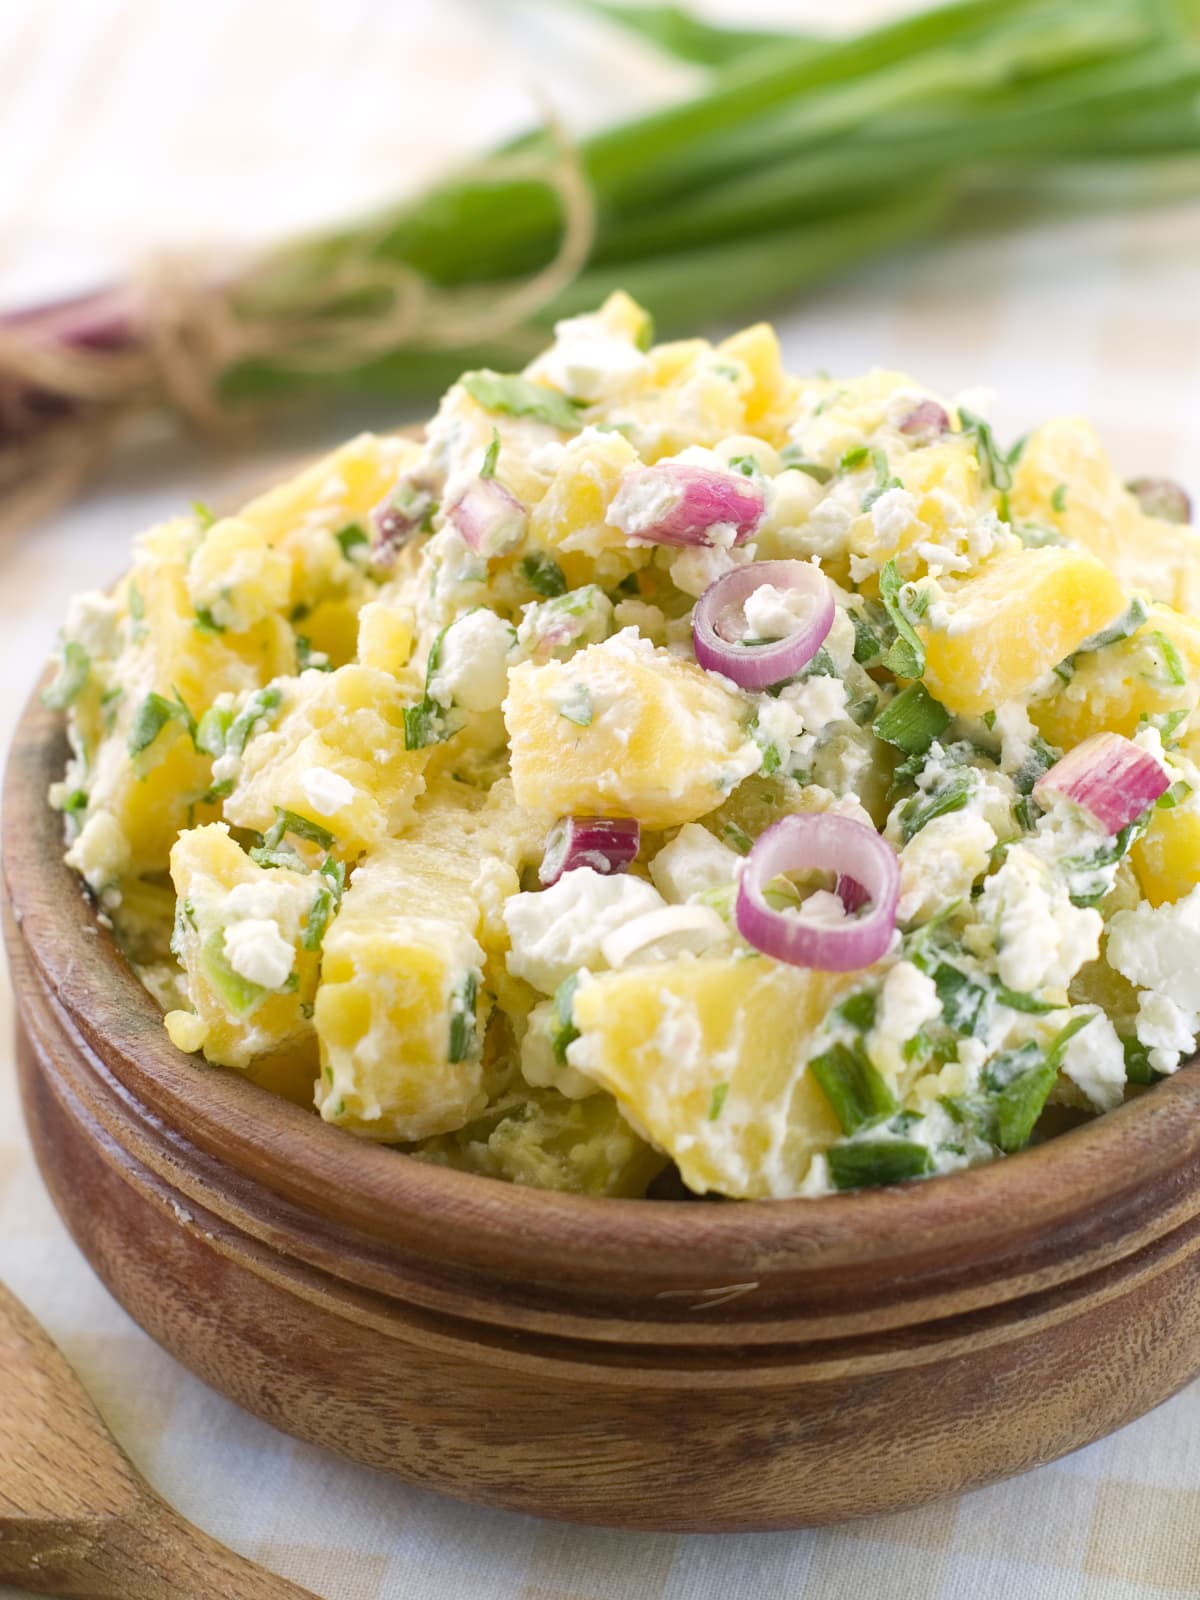 An overflowing bowl of classic potato salad topped with red onion